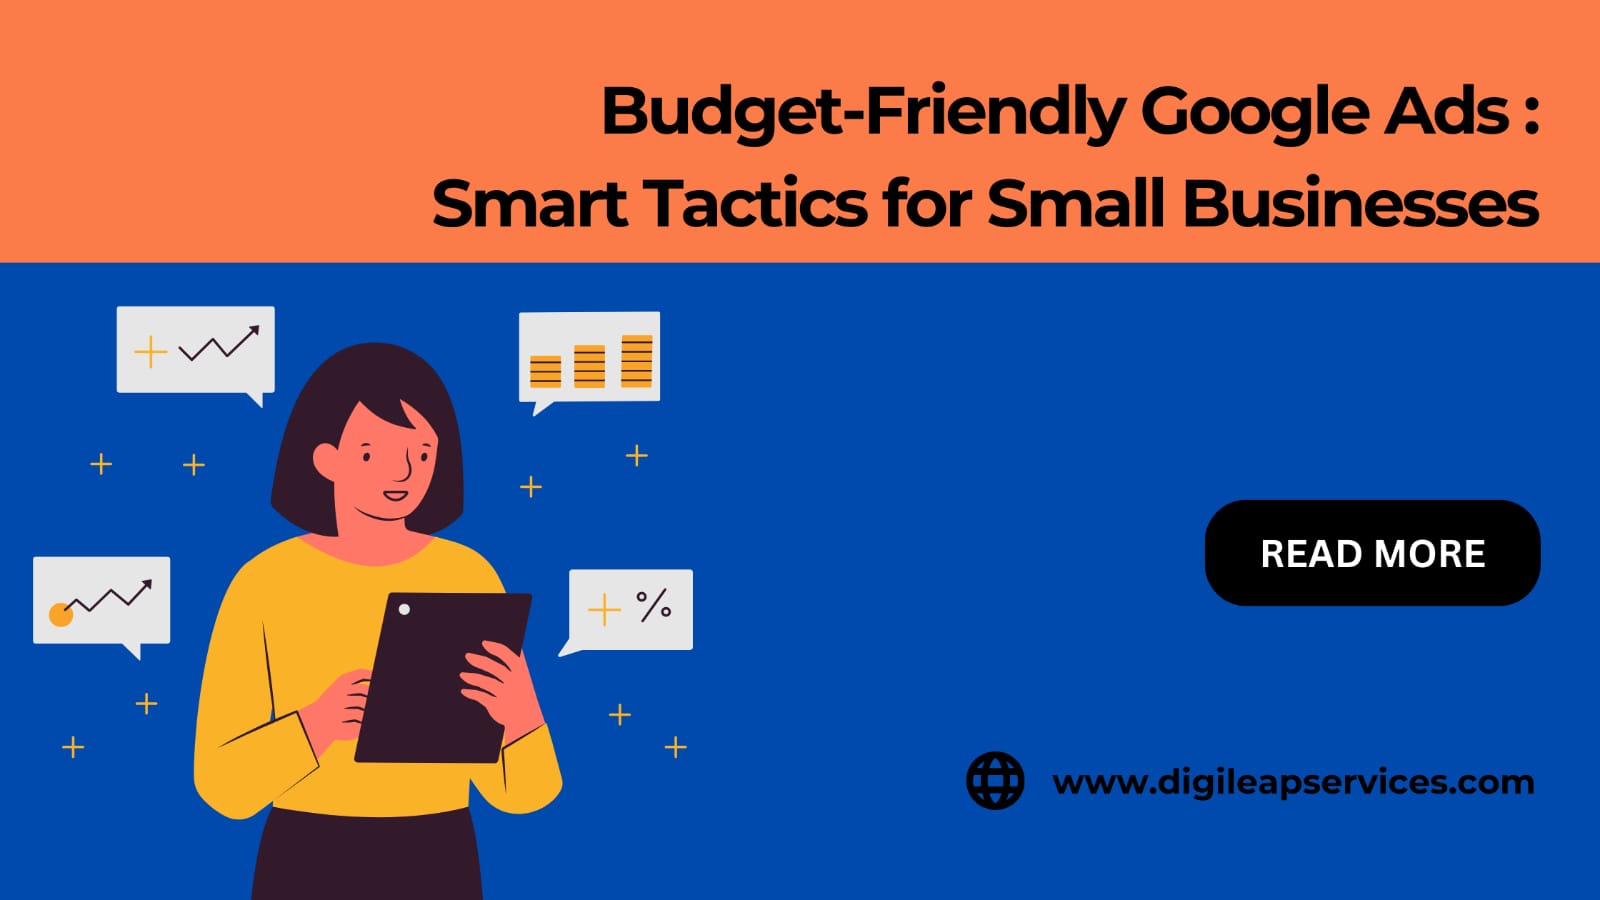 Budget-Friendly Google Ads: Smart Tactics for Small Businesses